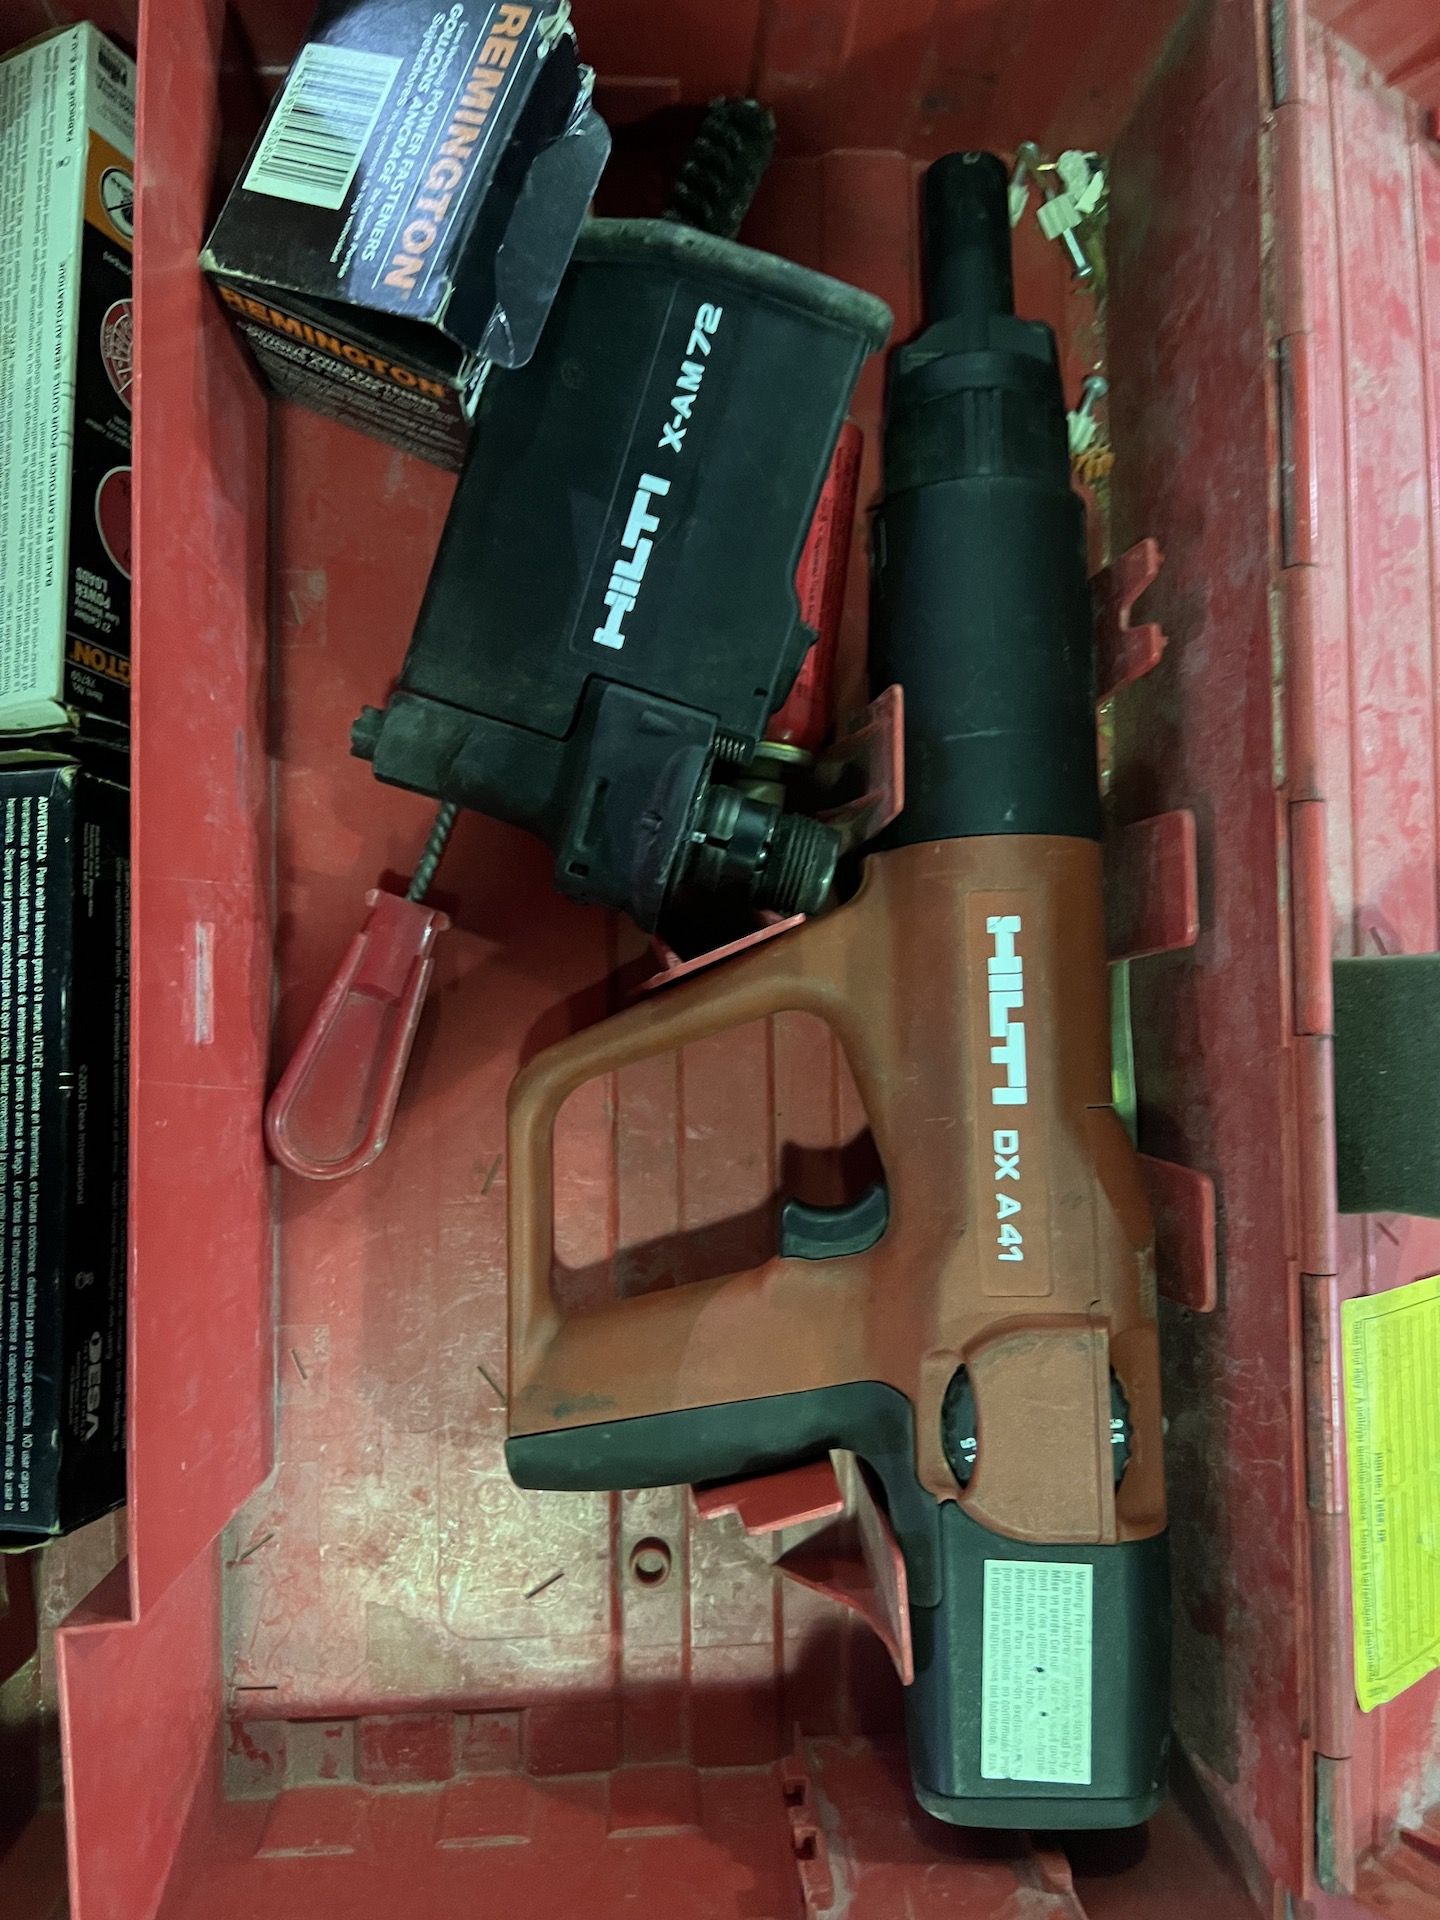 HILTI DX A41 POWDER ACTUATED NAIL GUN WITH X-1M72 MAGAZINE - Image 10 of 13